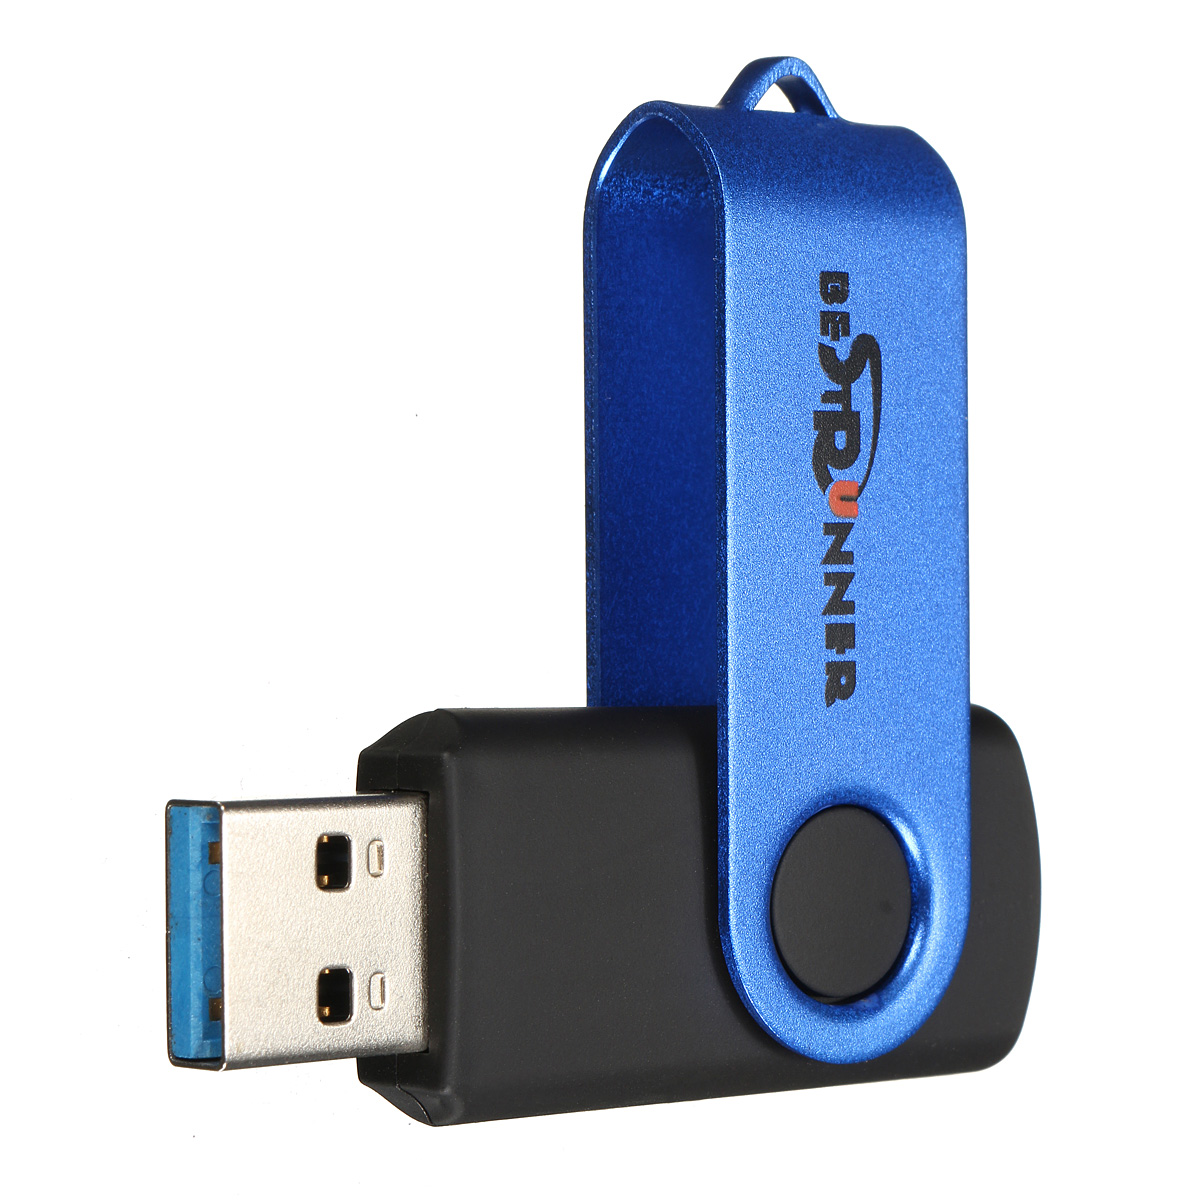 Find Bestrunner 32G USB3 0 Flash Drives 360 Rotation Pen Drive Memory U Disk for Sale on Gipsybee.com with cryptocurrencies